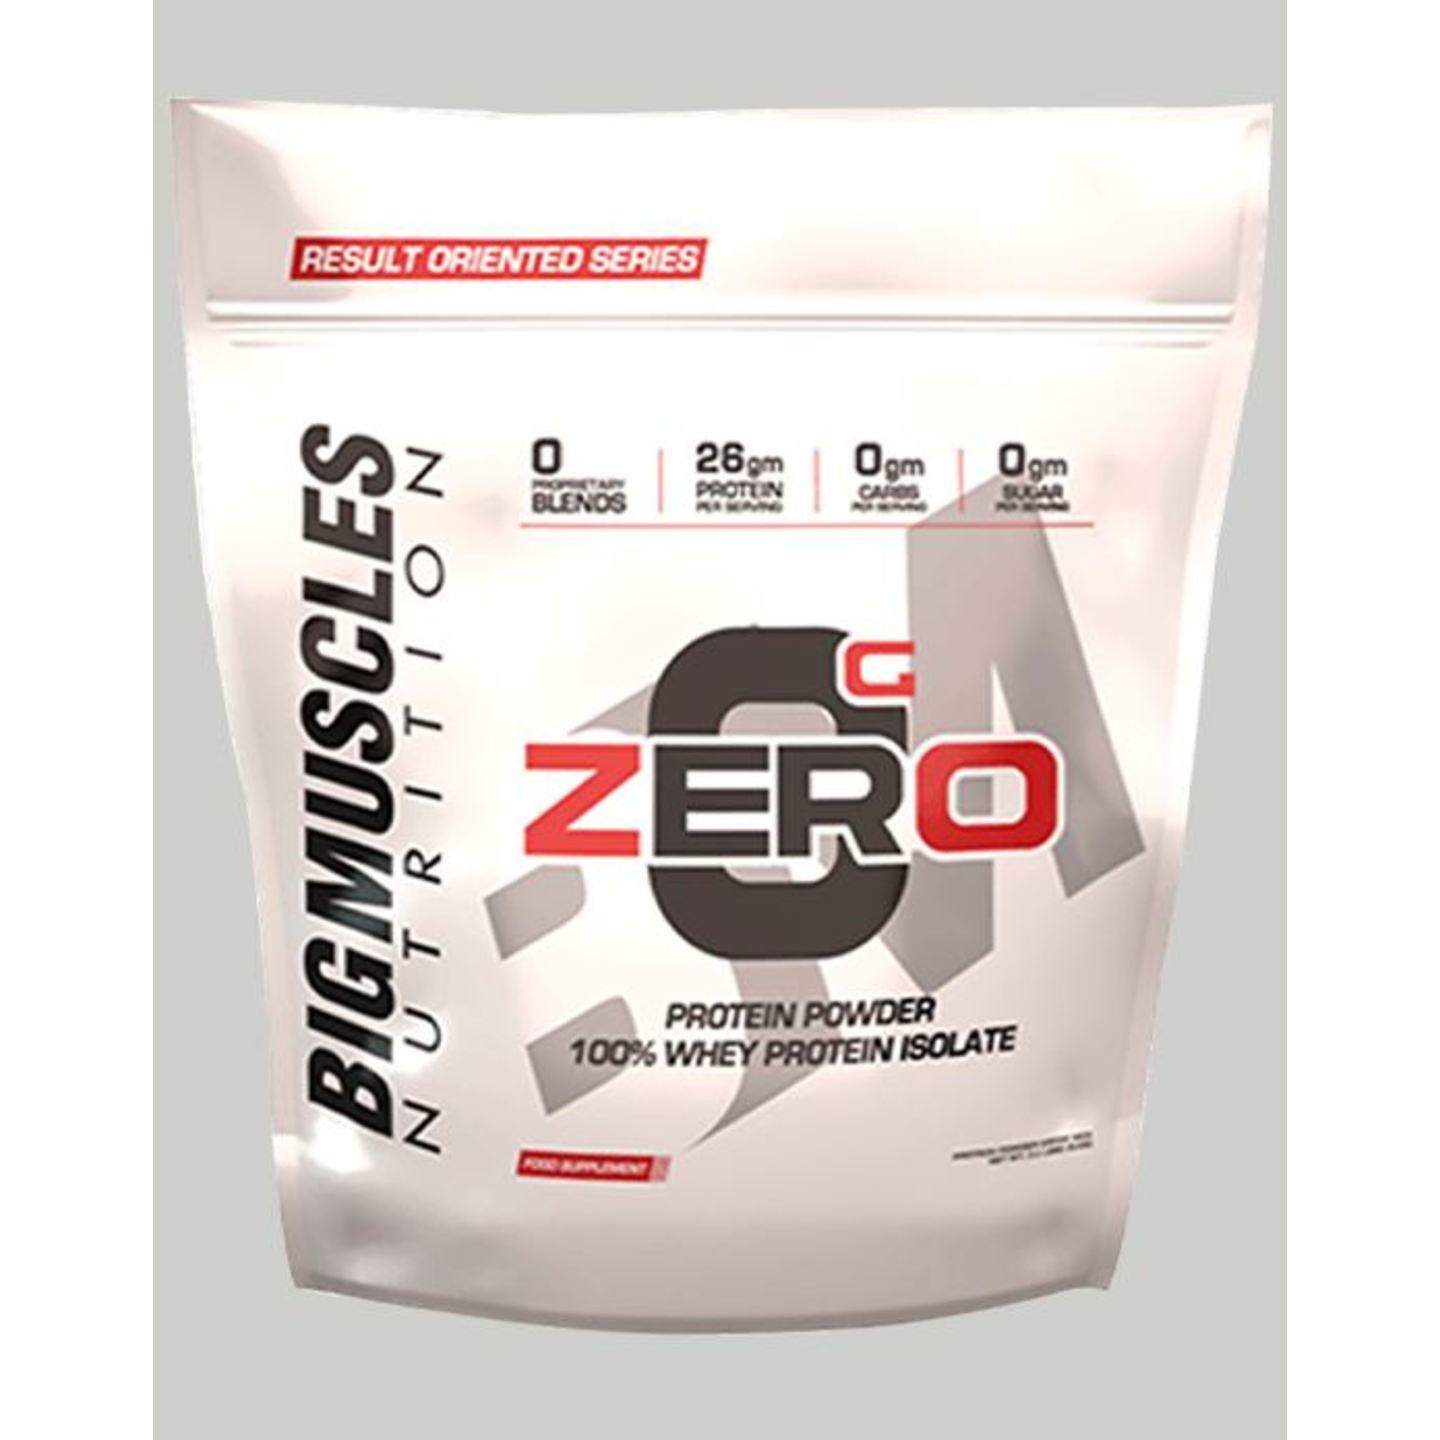 MastMart Bigmuscles Nutrition ZERO Protein Powder from 100 Whey Isolate Caffe Latte 9 lbs